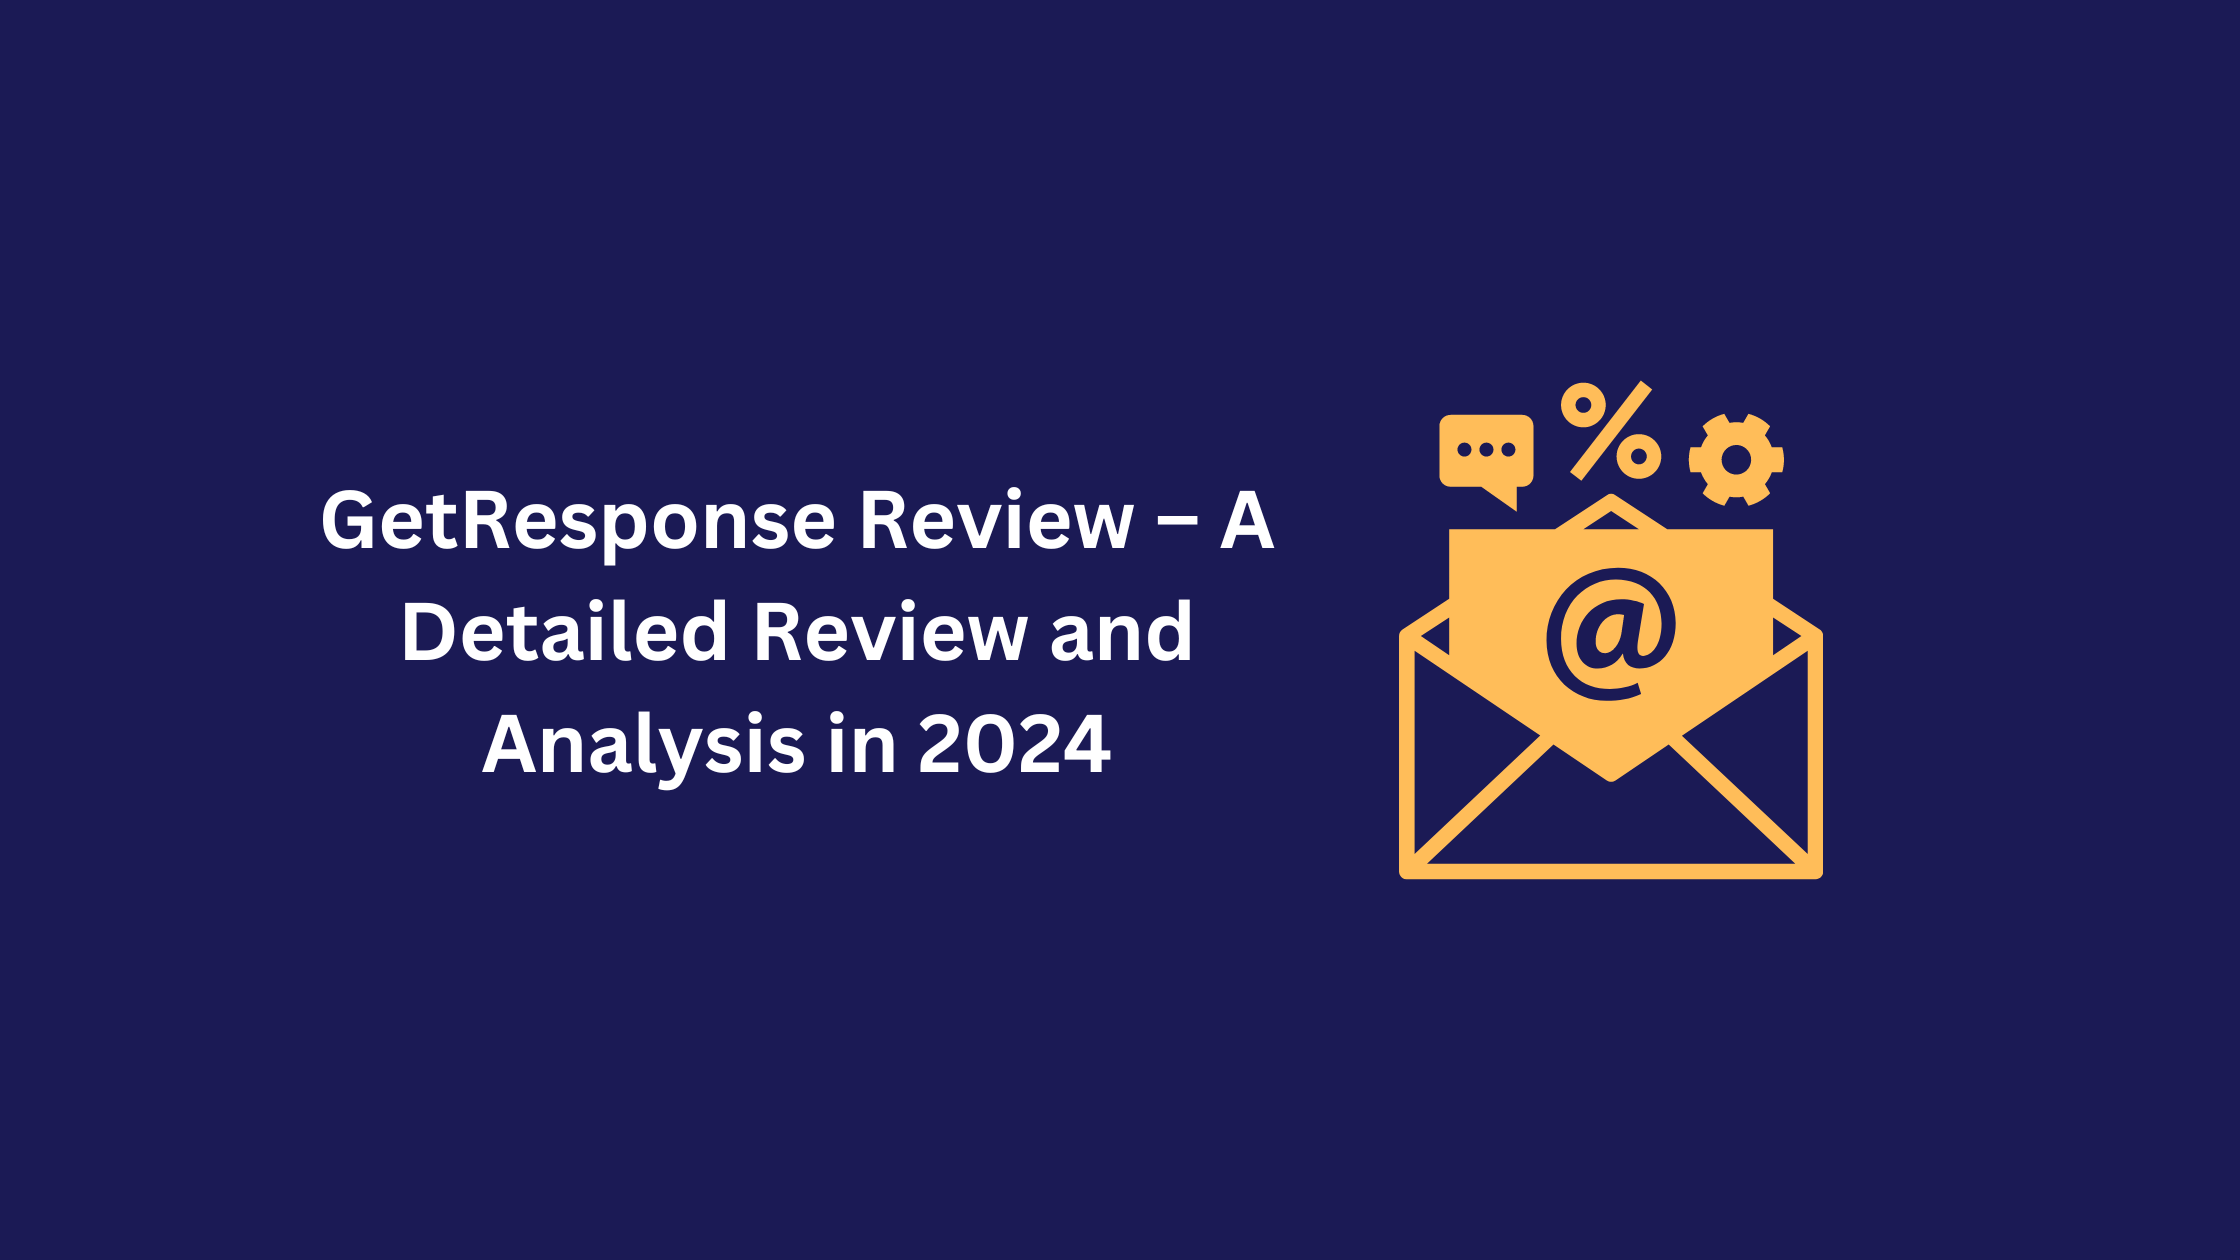 GetResponse Review – An Honest Detailed Review and Analysis in 2024